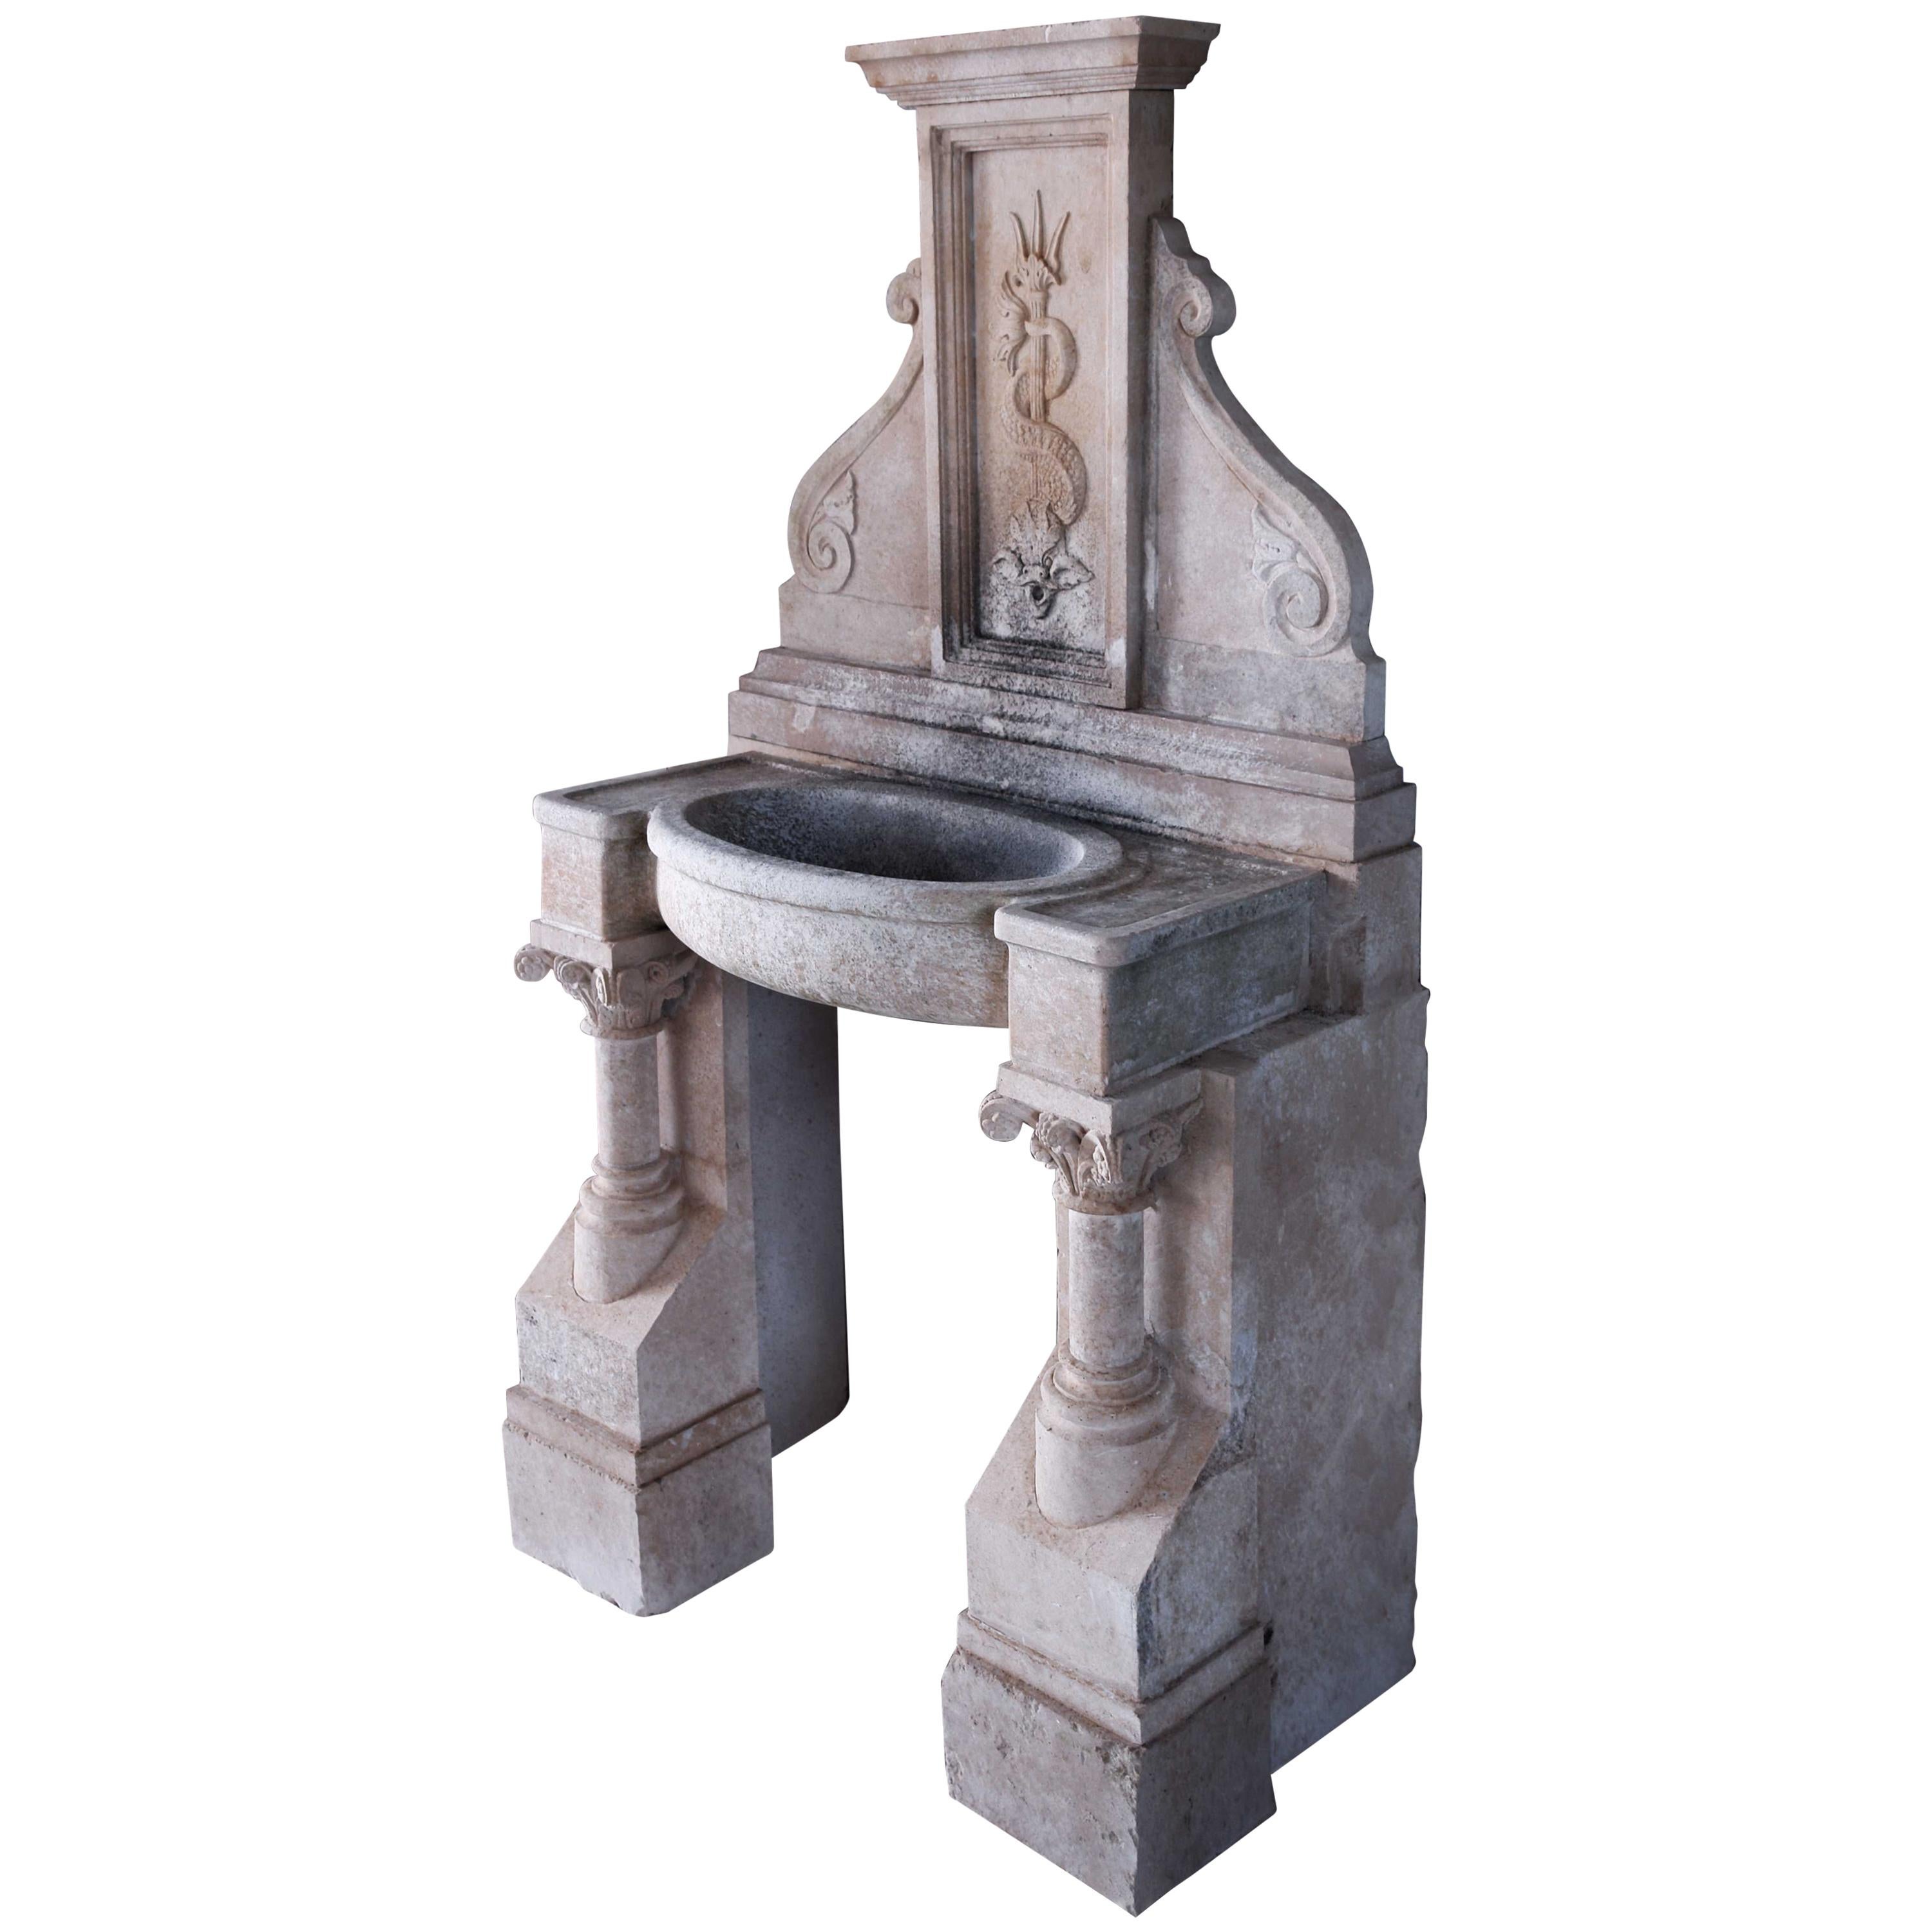 Italian Renaissance Style Fountain Hand-Carved in Pure Limestone Antique Patina For Sale